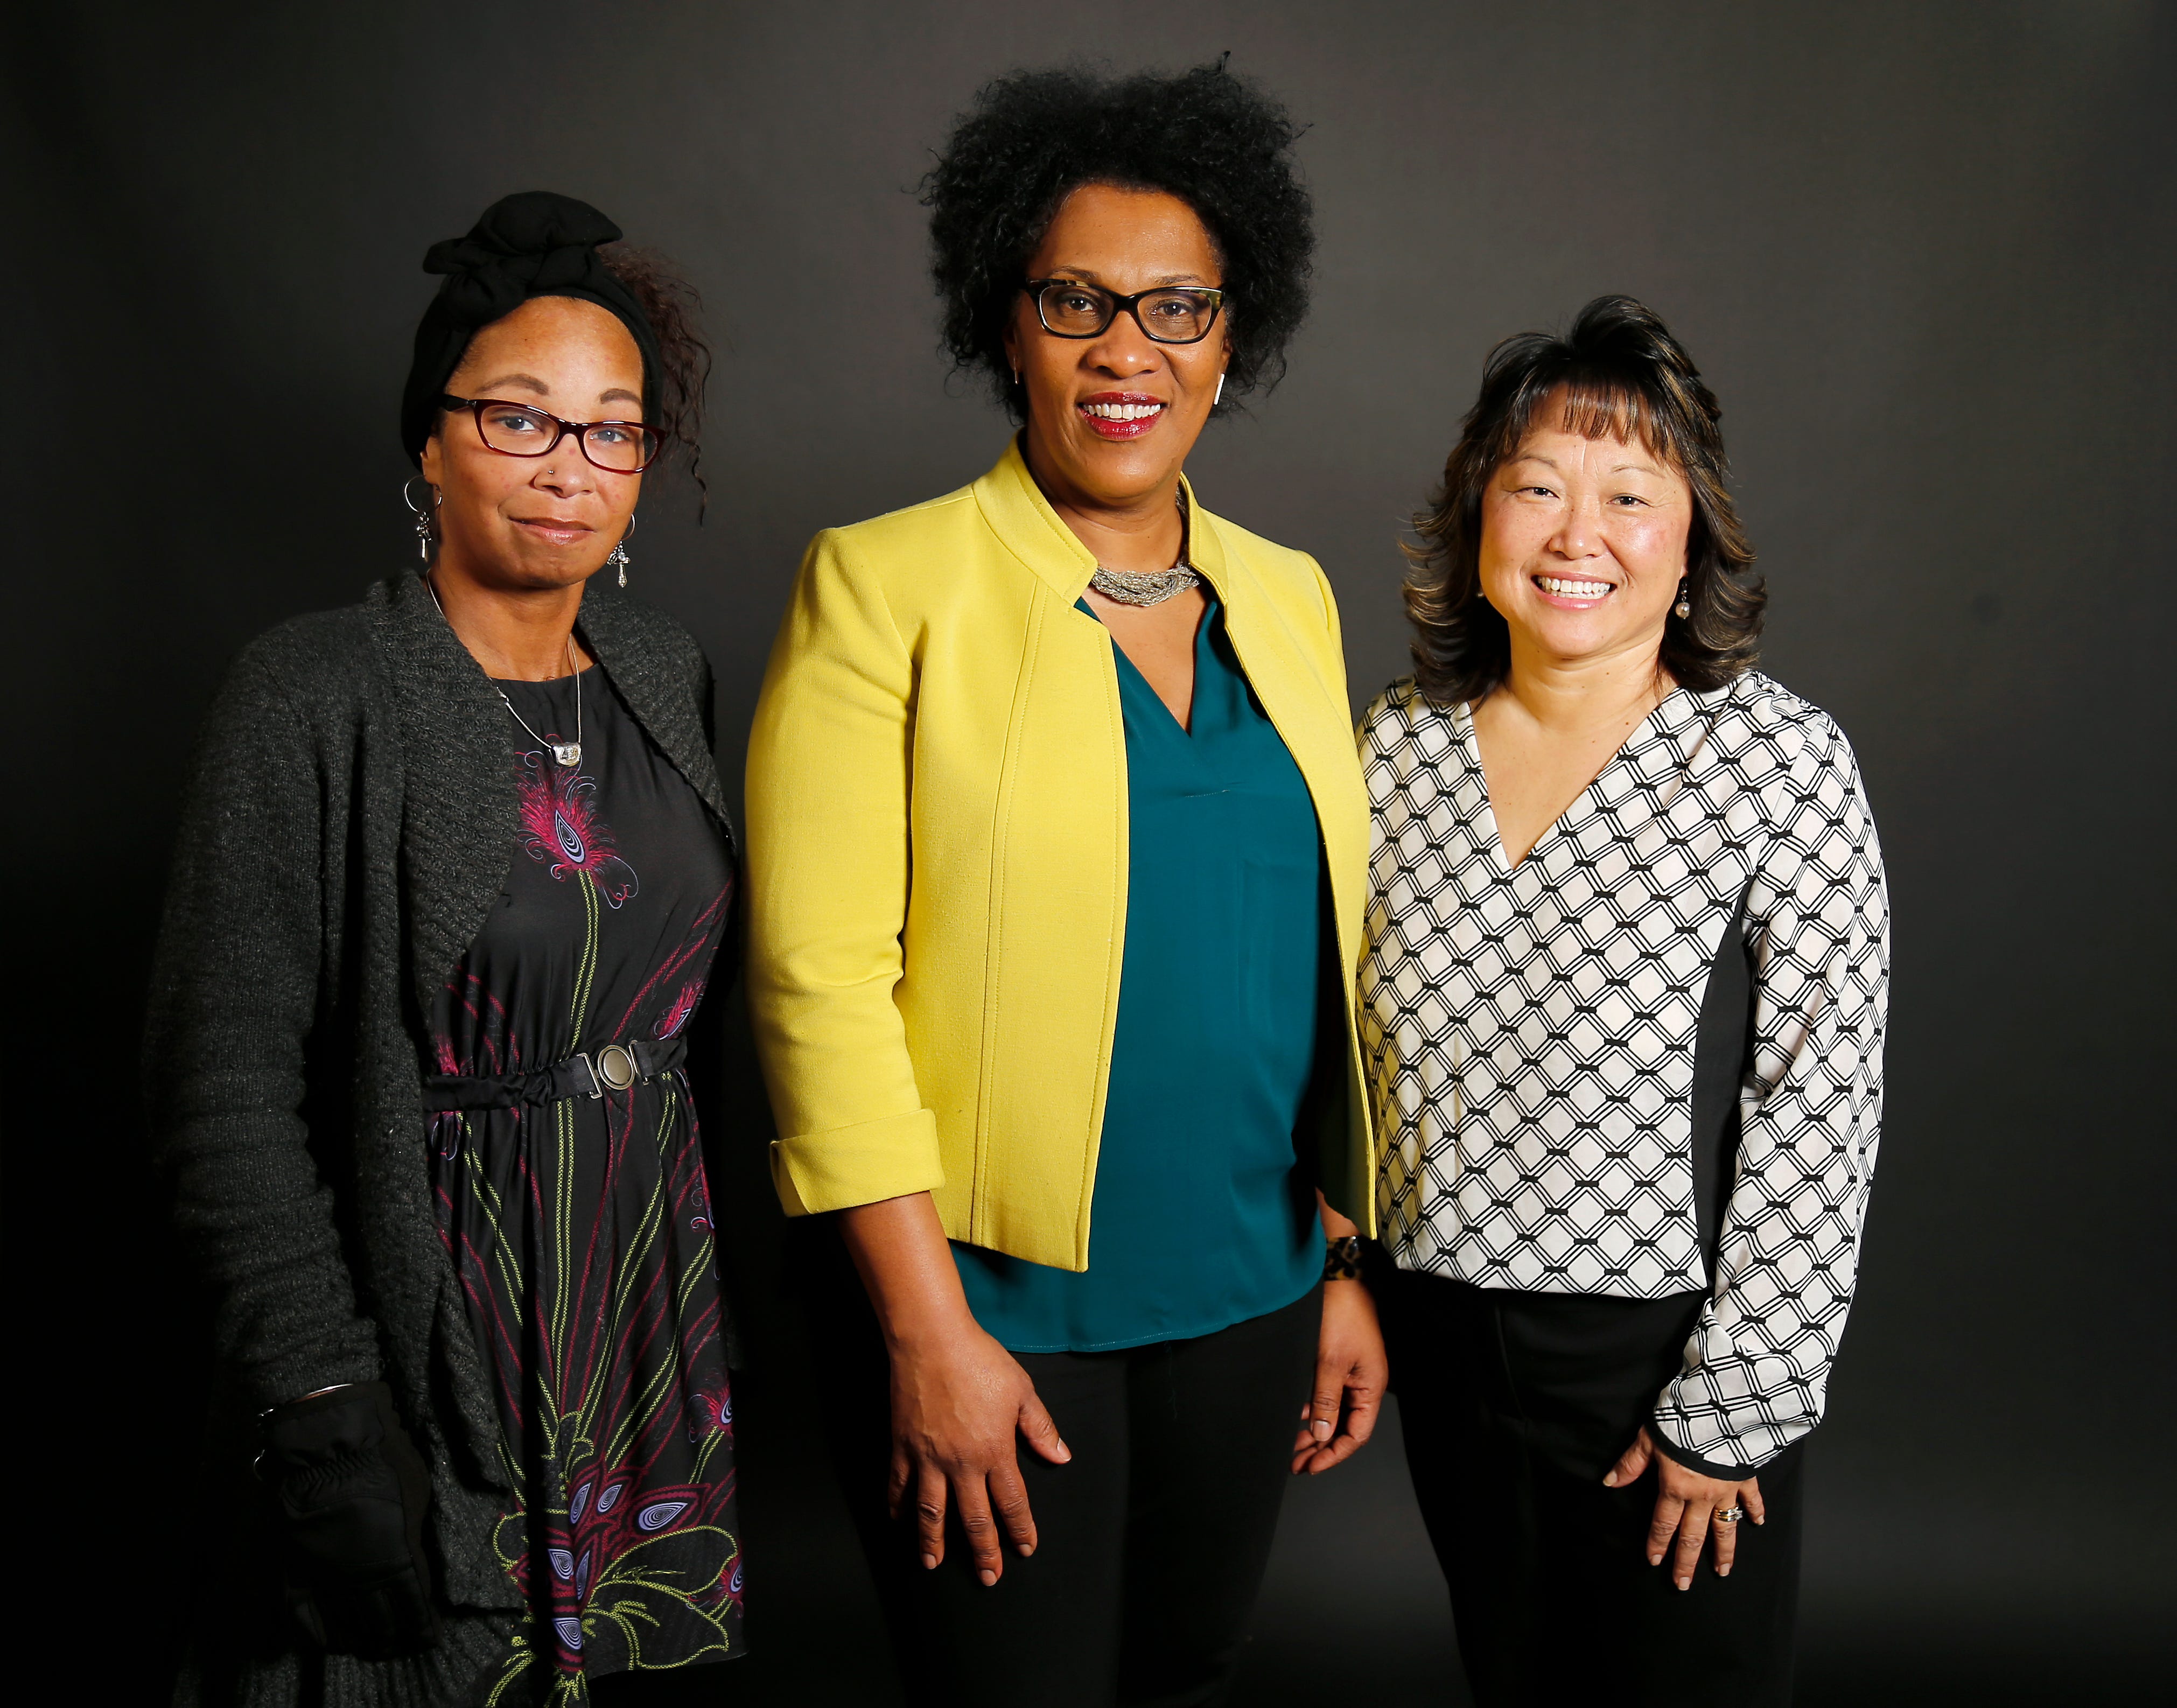 These three moms know more about racism in schools than most